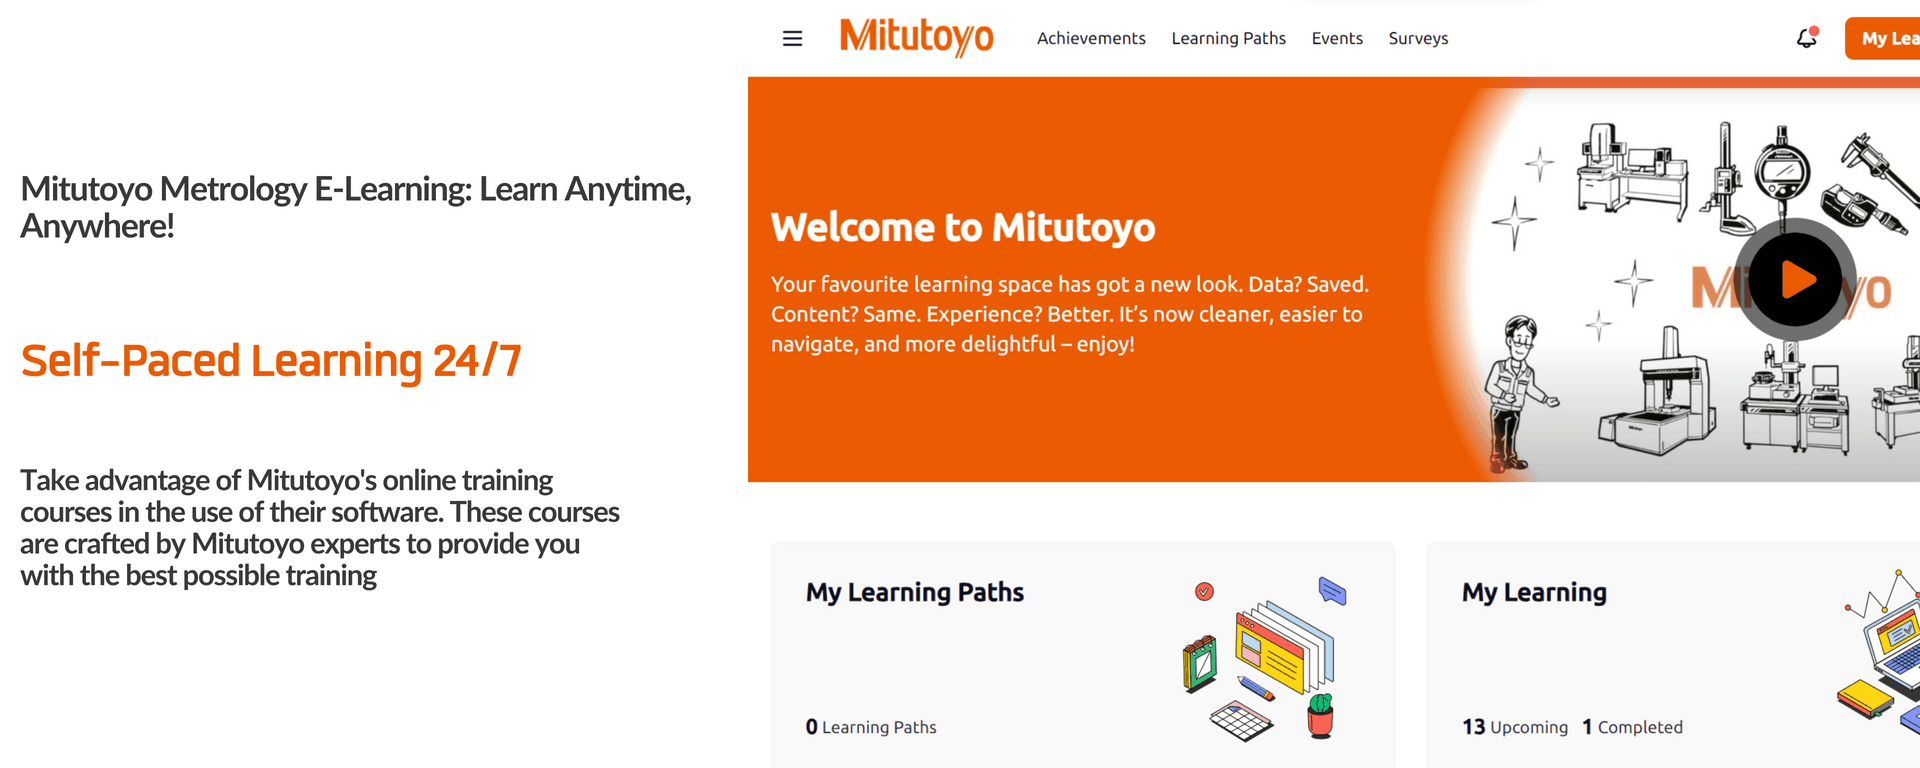 Mitutoyo E-learning